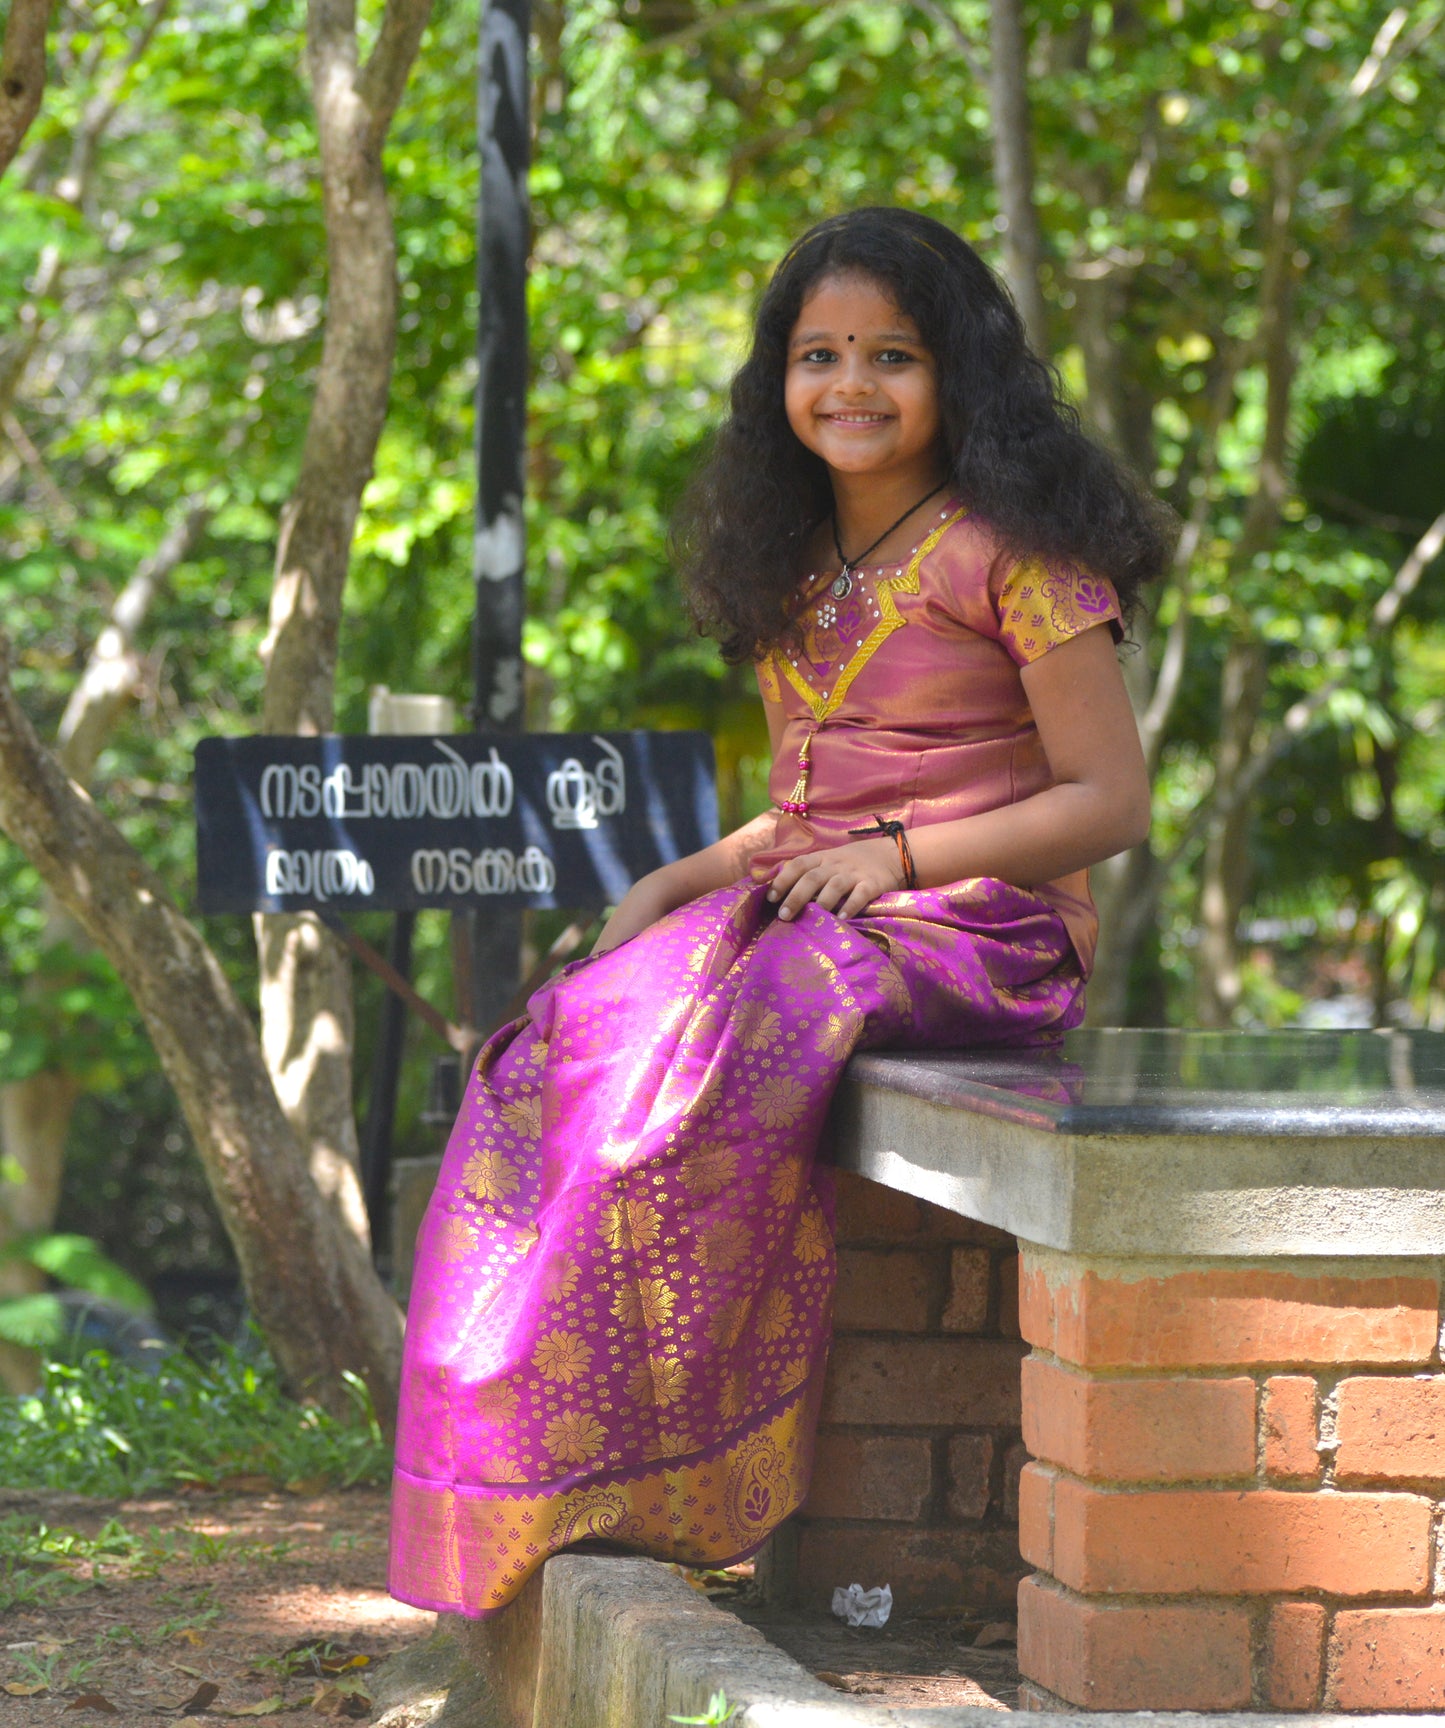 Southloom Magenta Pattupavada and Blouse (Traditional Ethnic Skirt and Blouse for Girls)